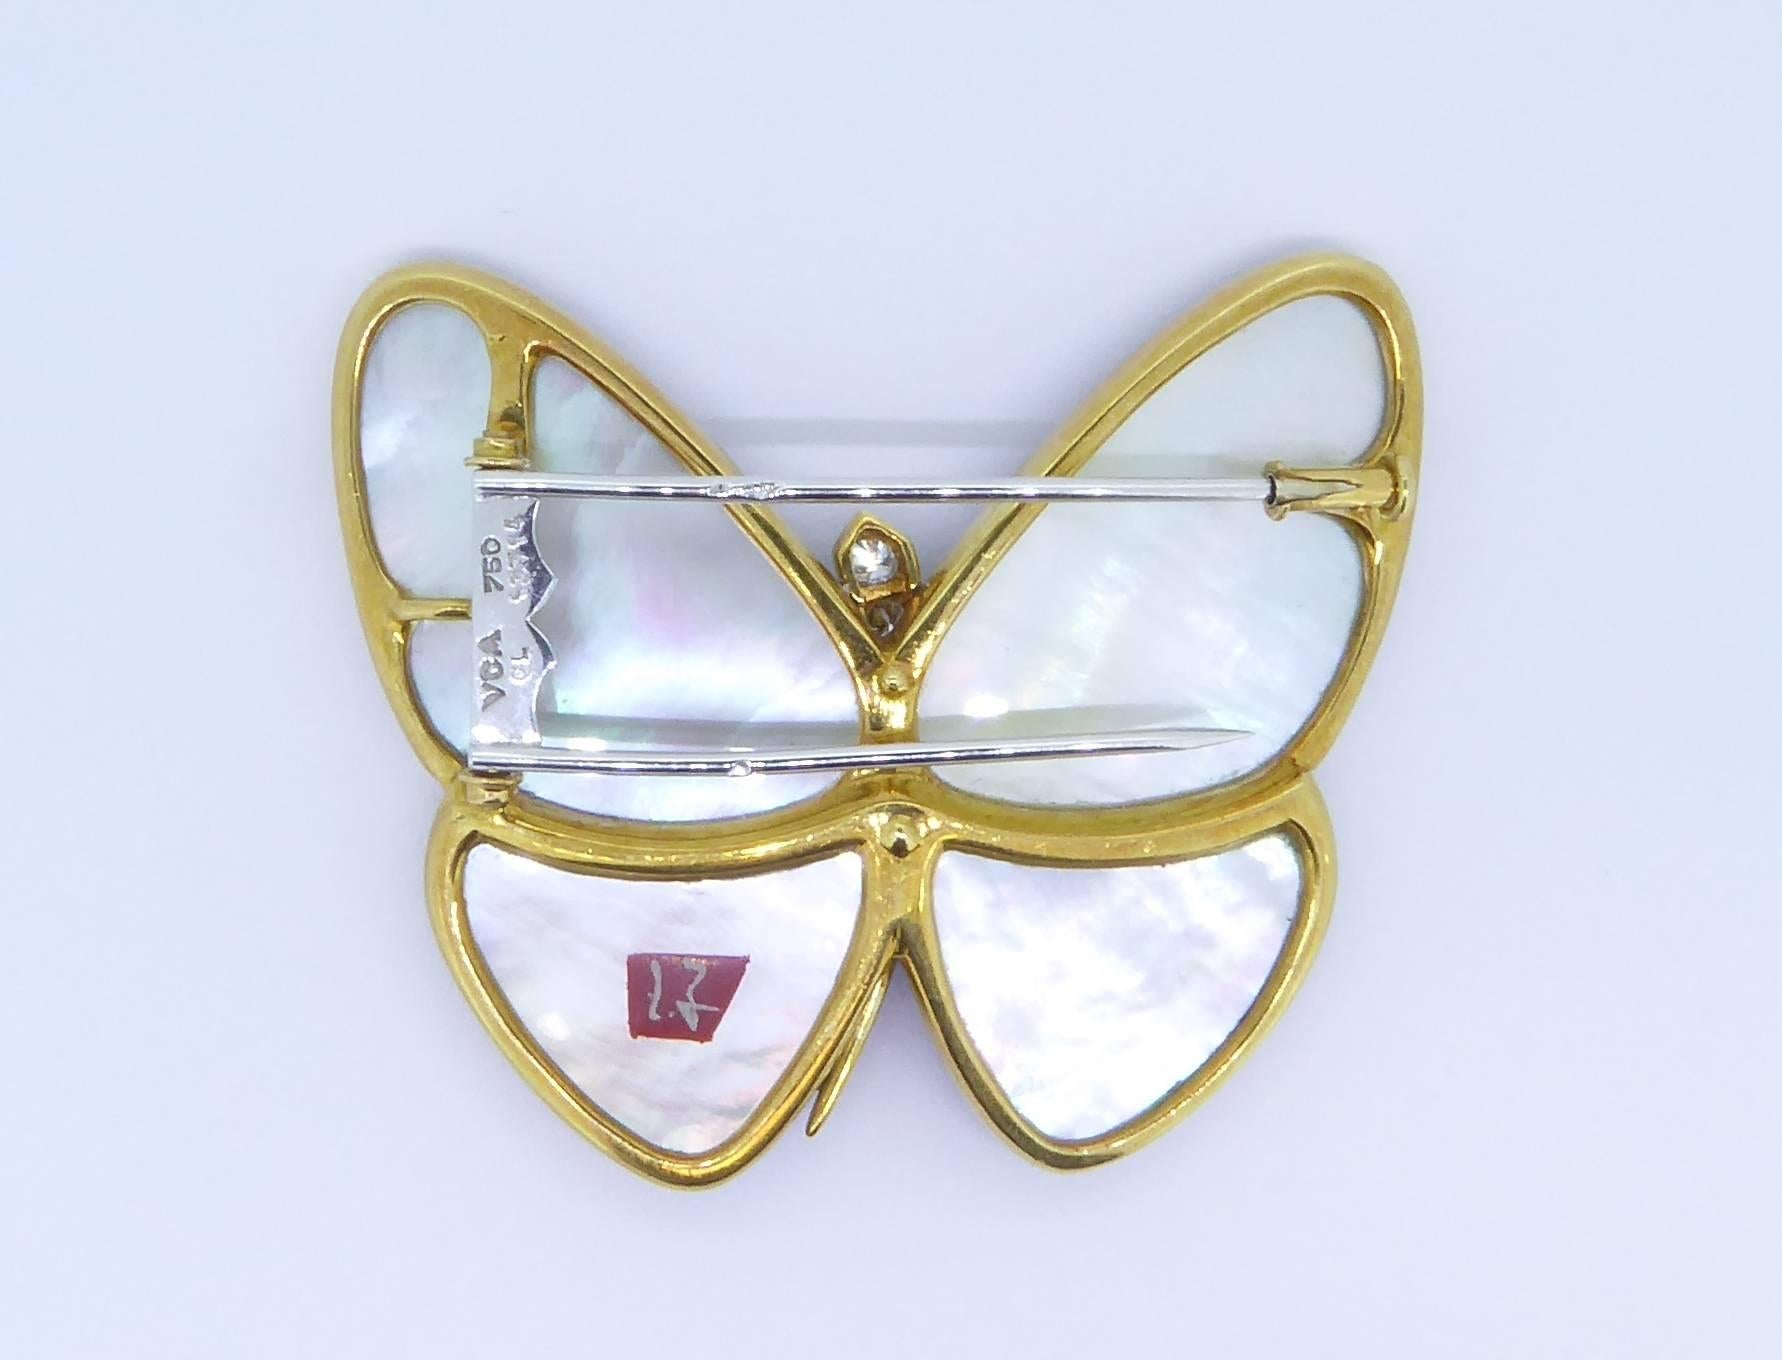 A Van Cleef & Arpels and Junichi Hakose Gold Diamond And Lacquer Butterfly Brooch. Mounted in 18ct yellow gold with 18ct white gold pin. The center of the butterfly has 9 graduated round brilliant-cut diamonds with an approximate total weight of